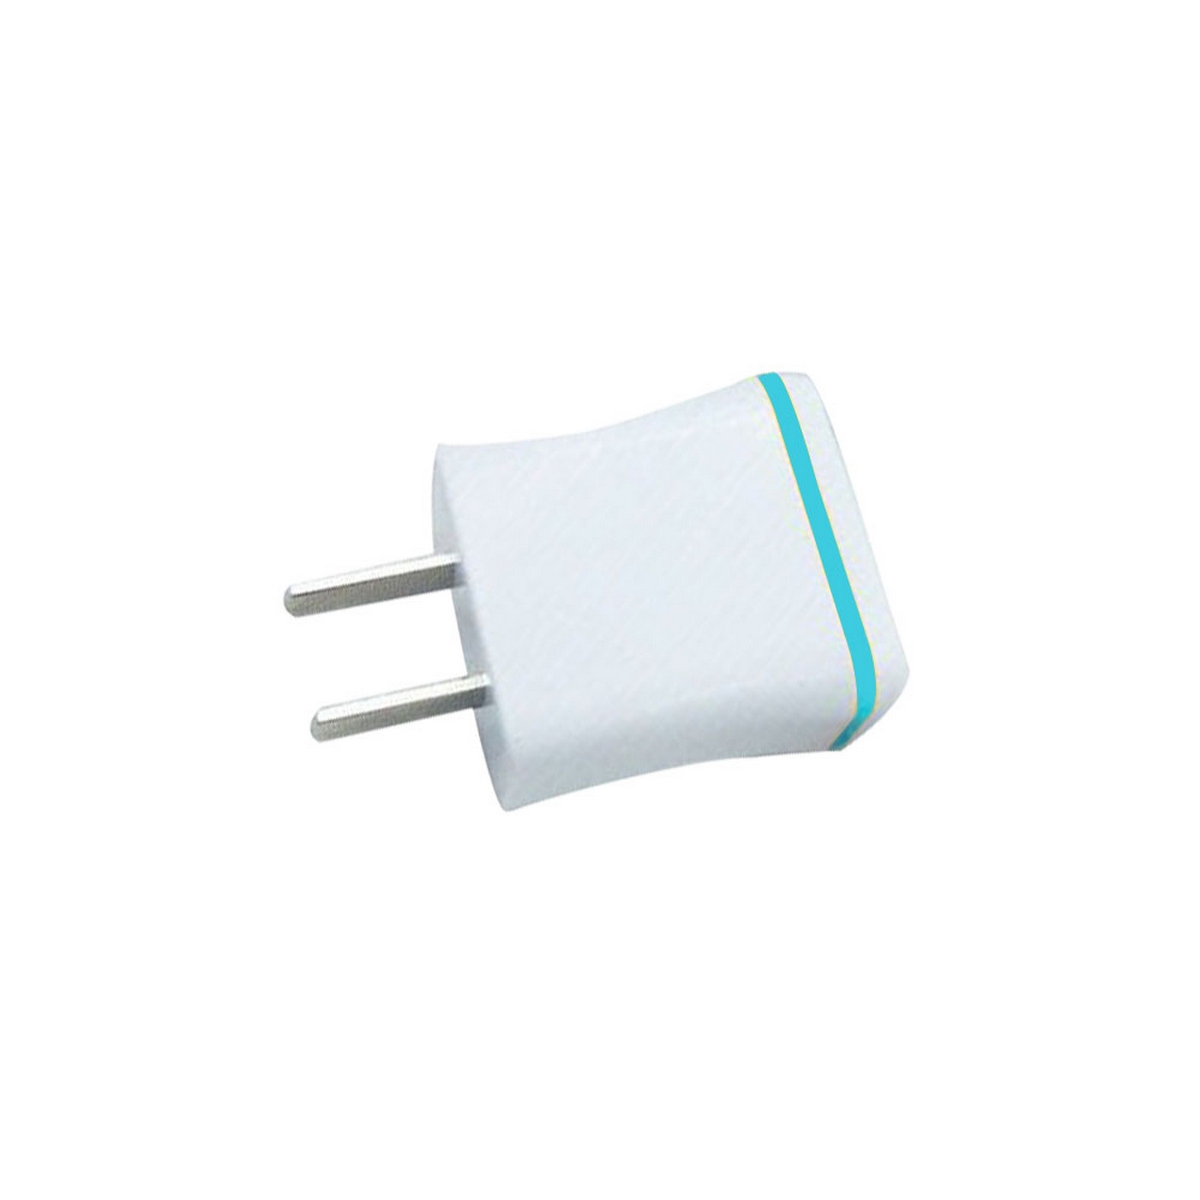 A/C Adapter USB Wall Charger